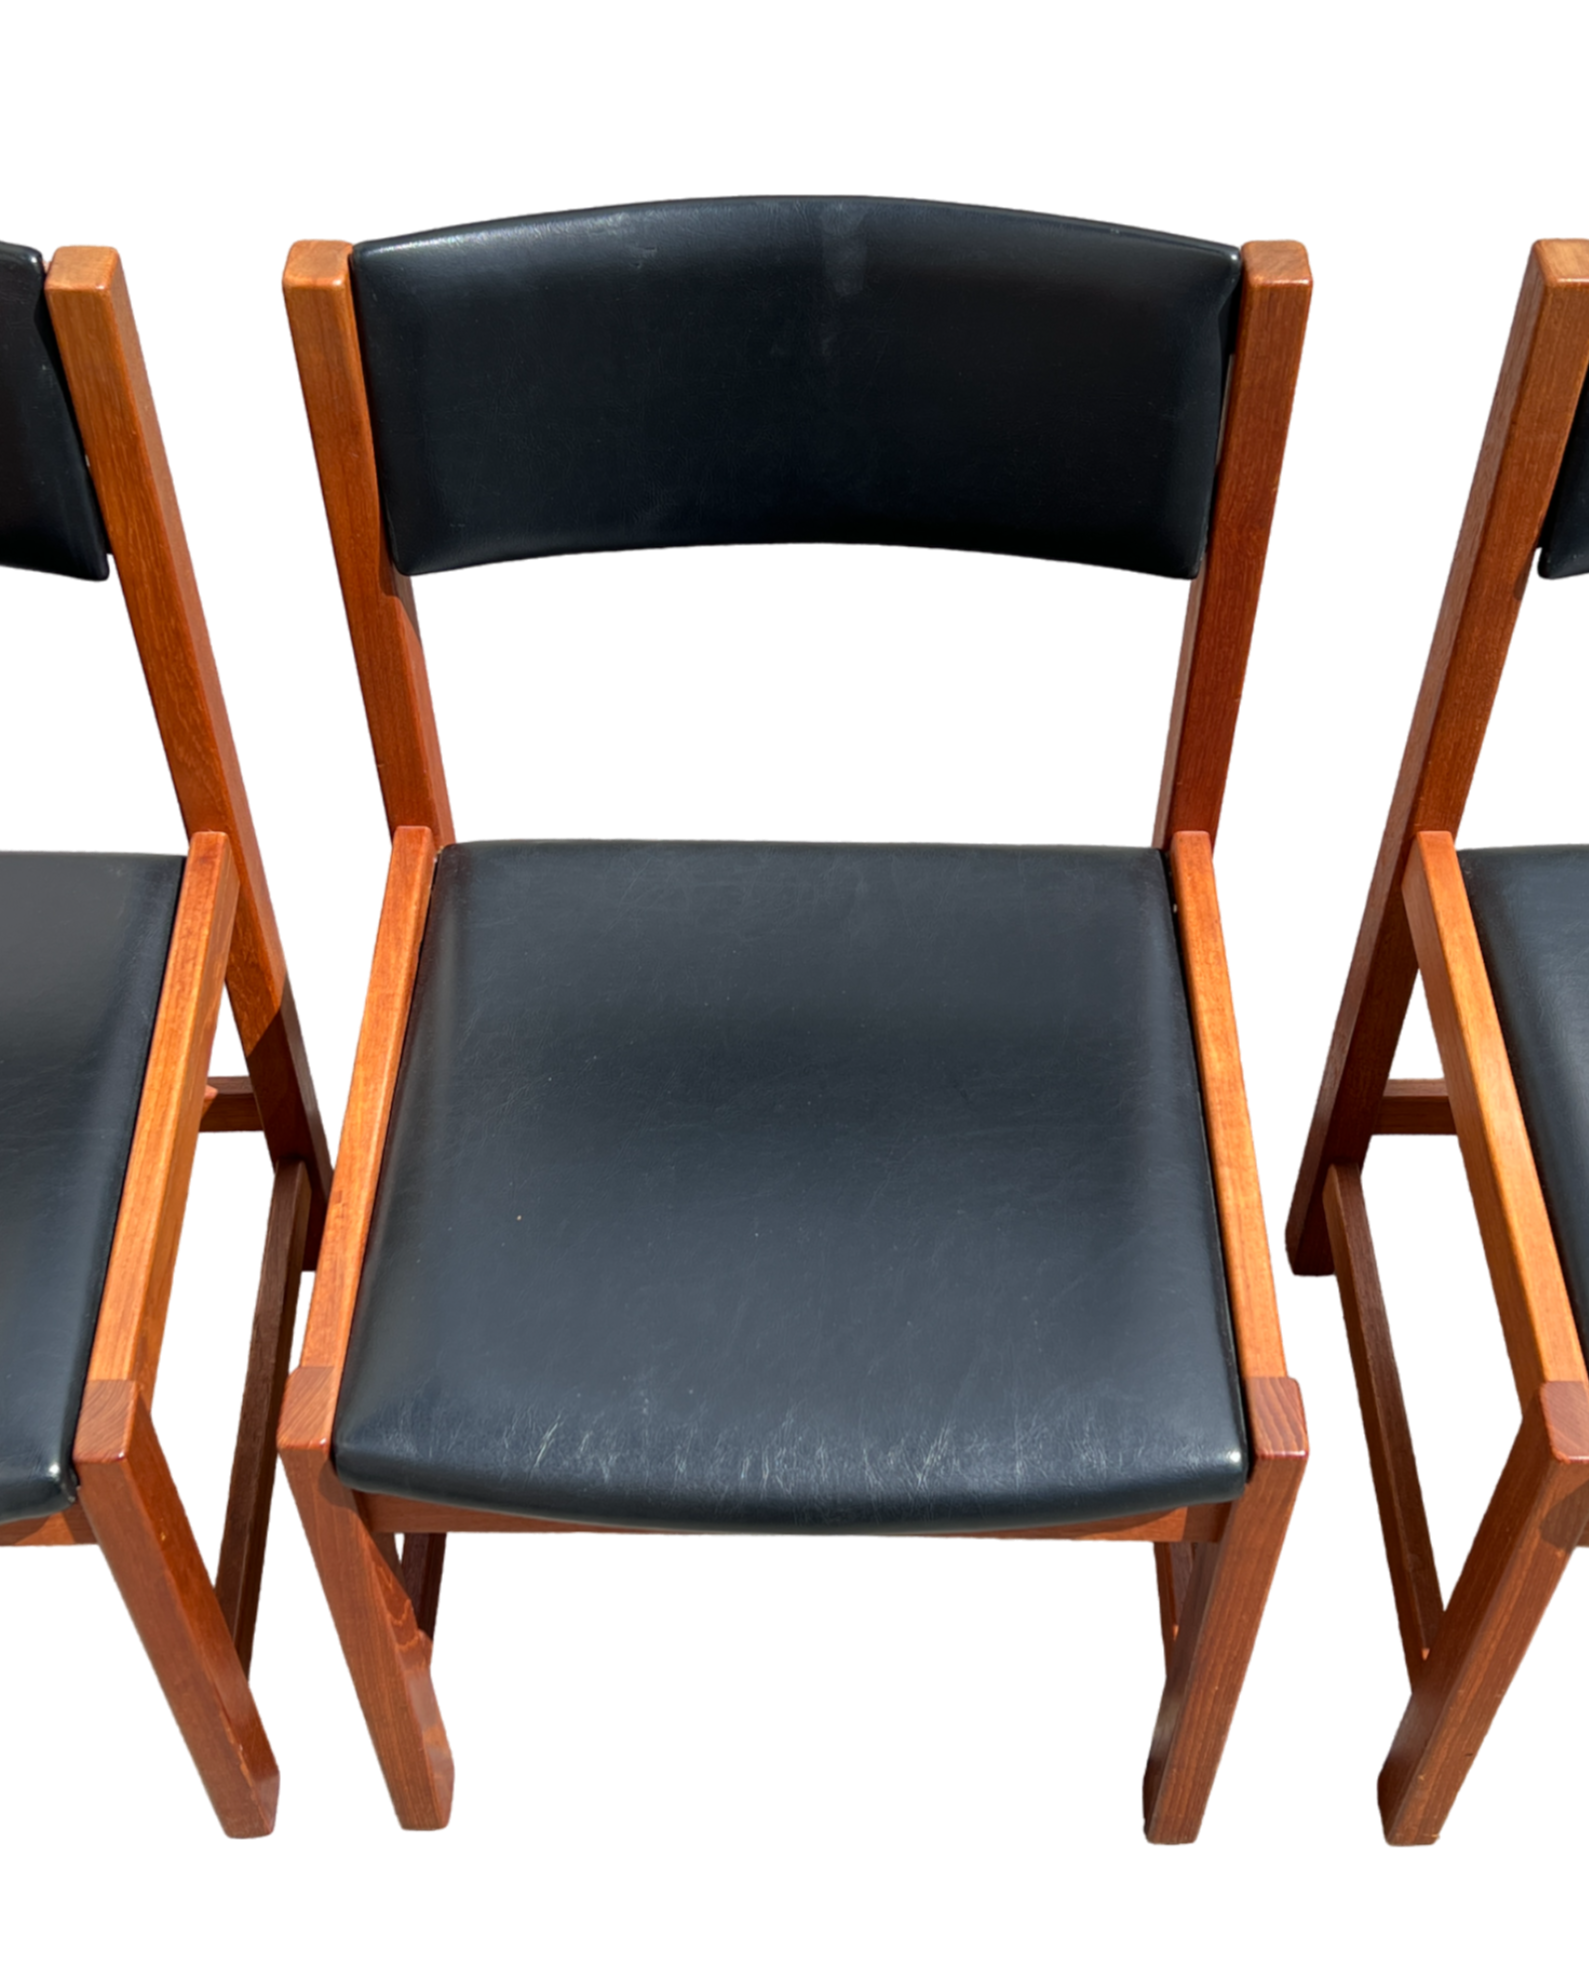 1960s Teak Dining Chairs by Ulferts, Made in Sweden